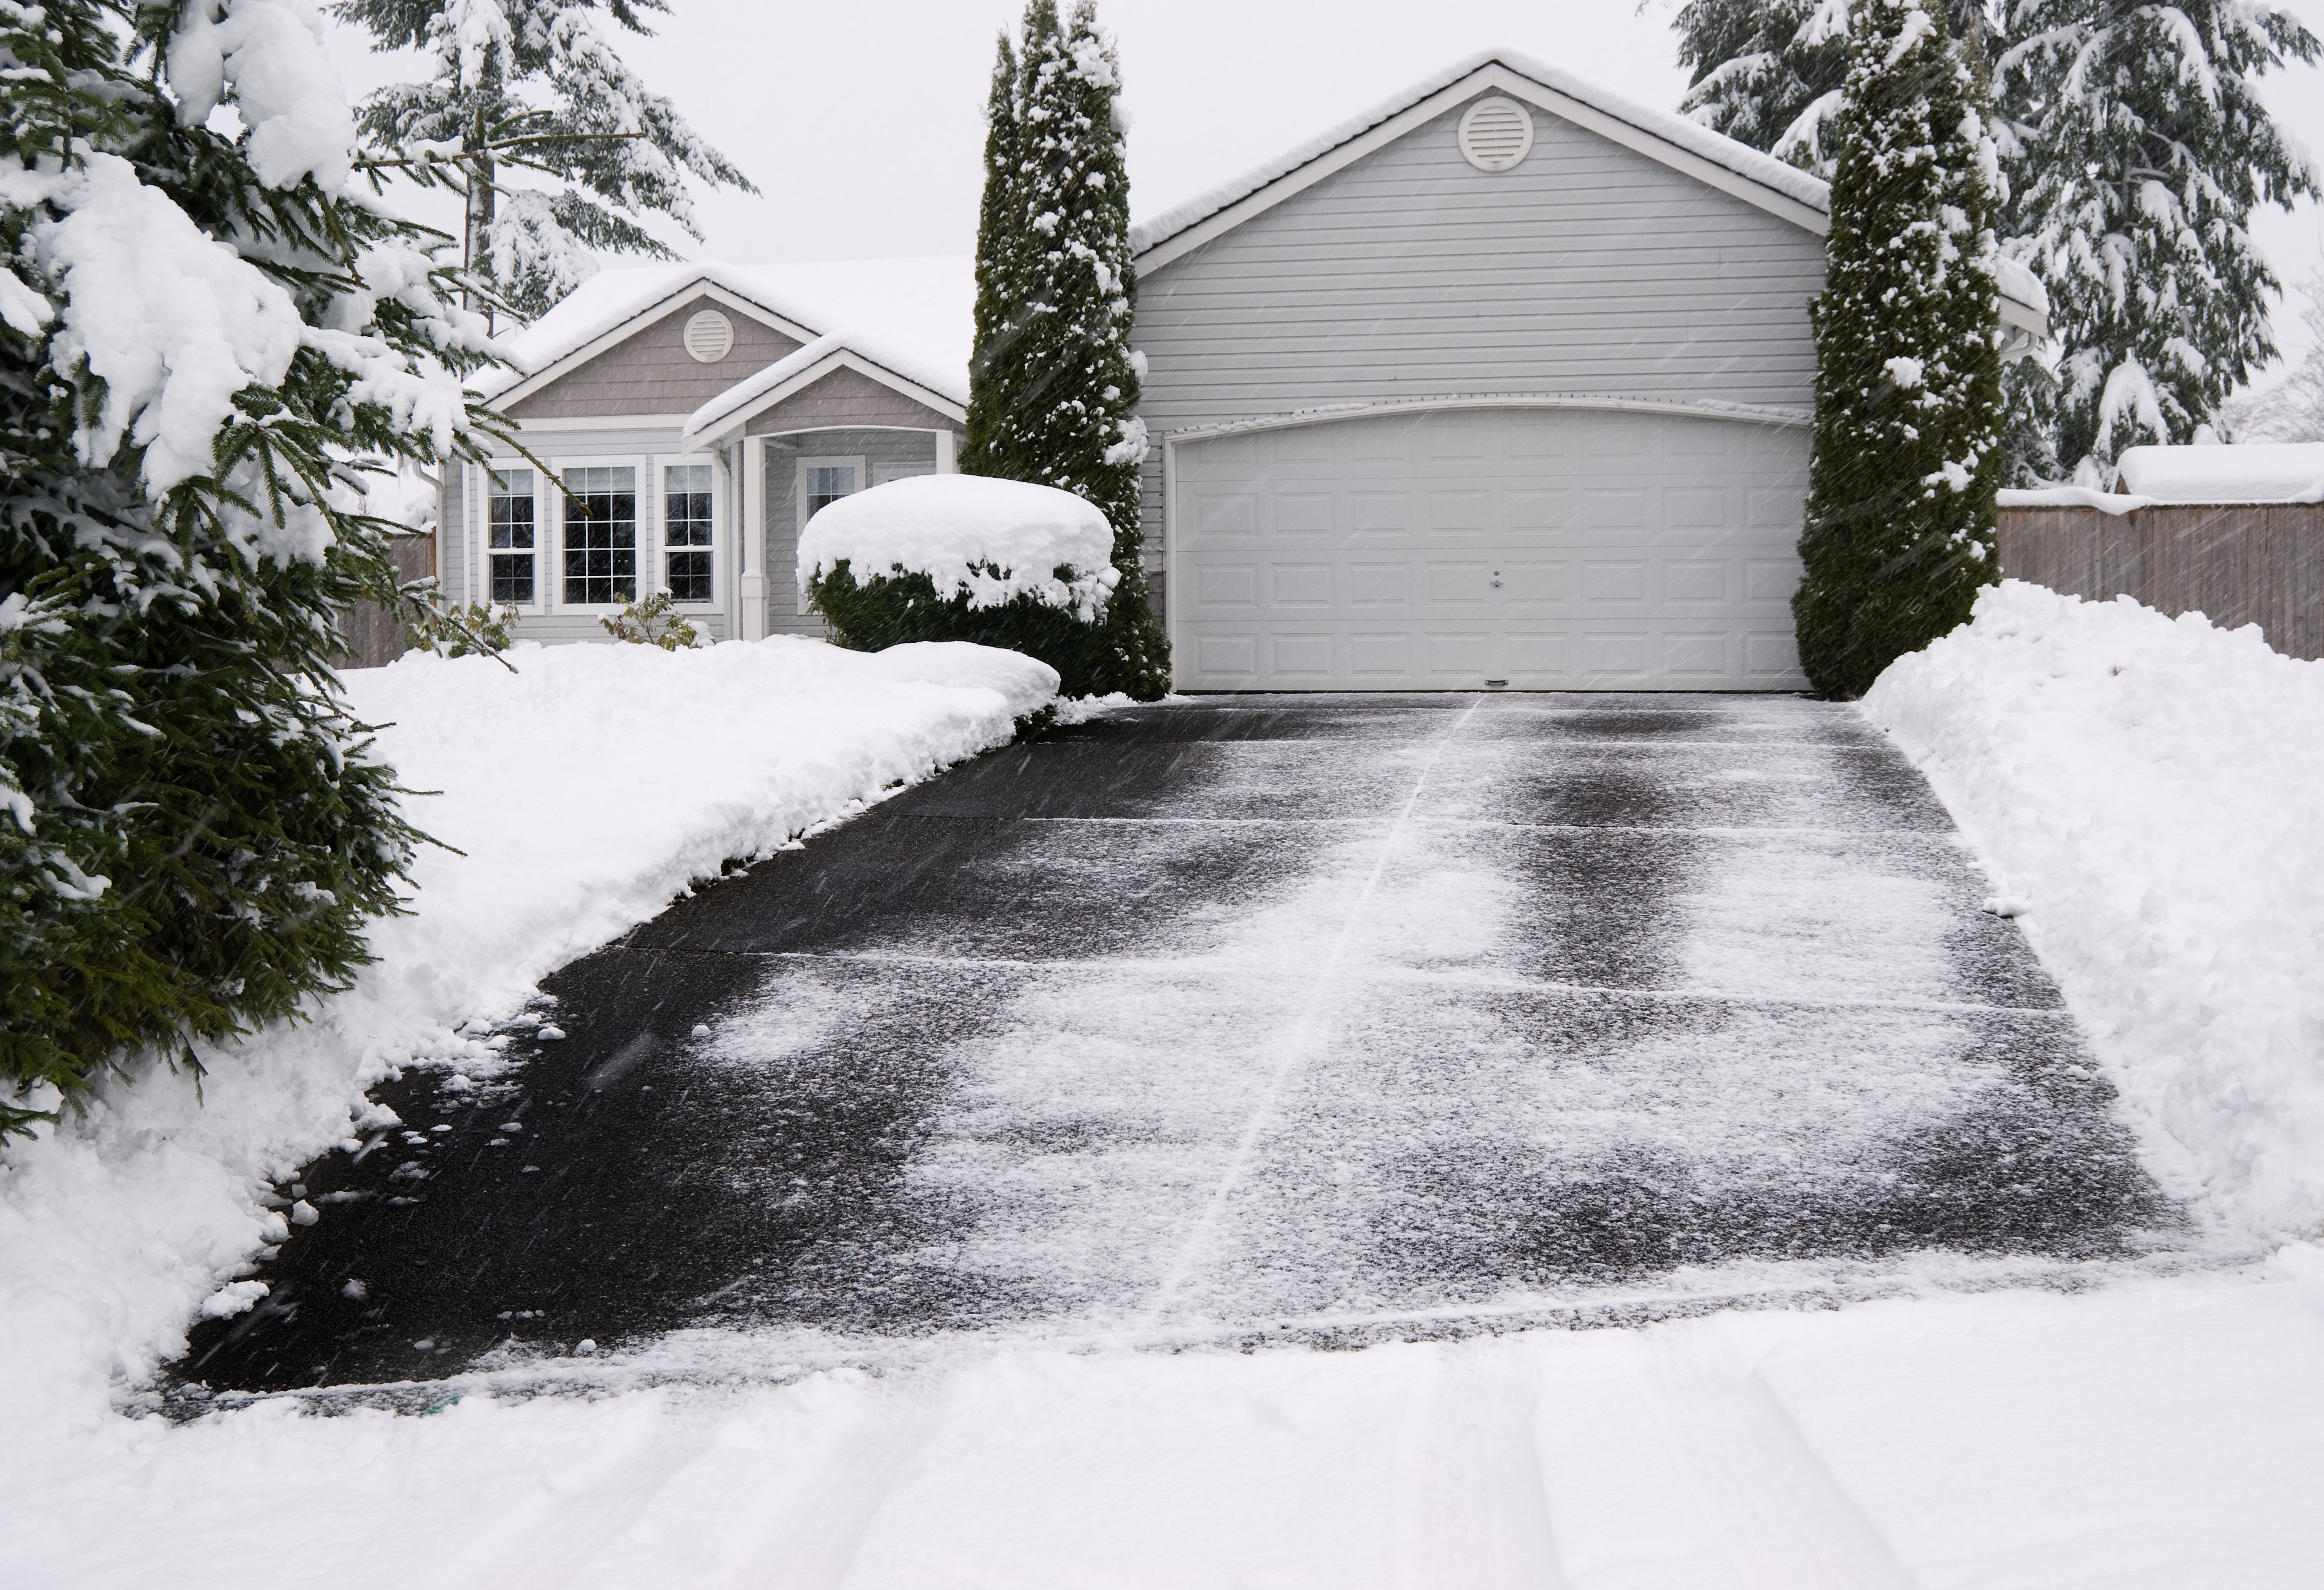 a medium sized home is blanketed in snow that features a large driveway surrounded by trees.